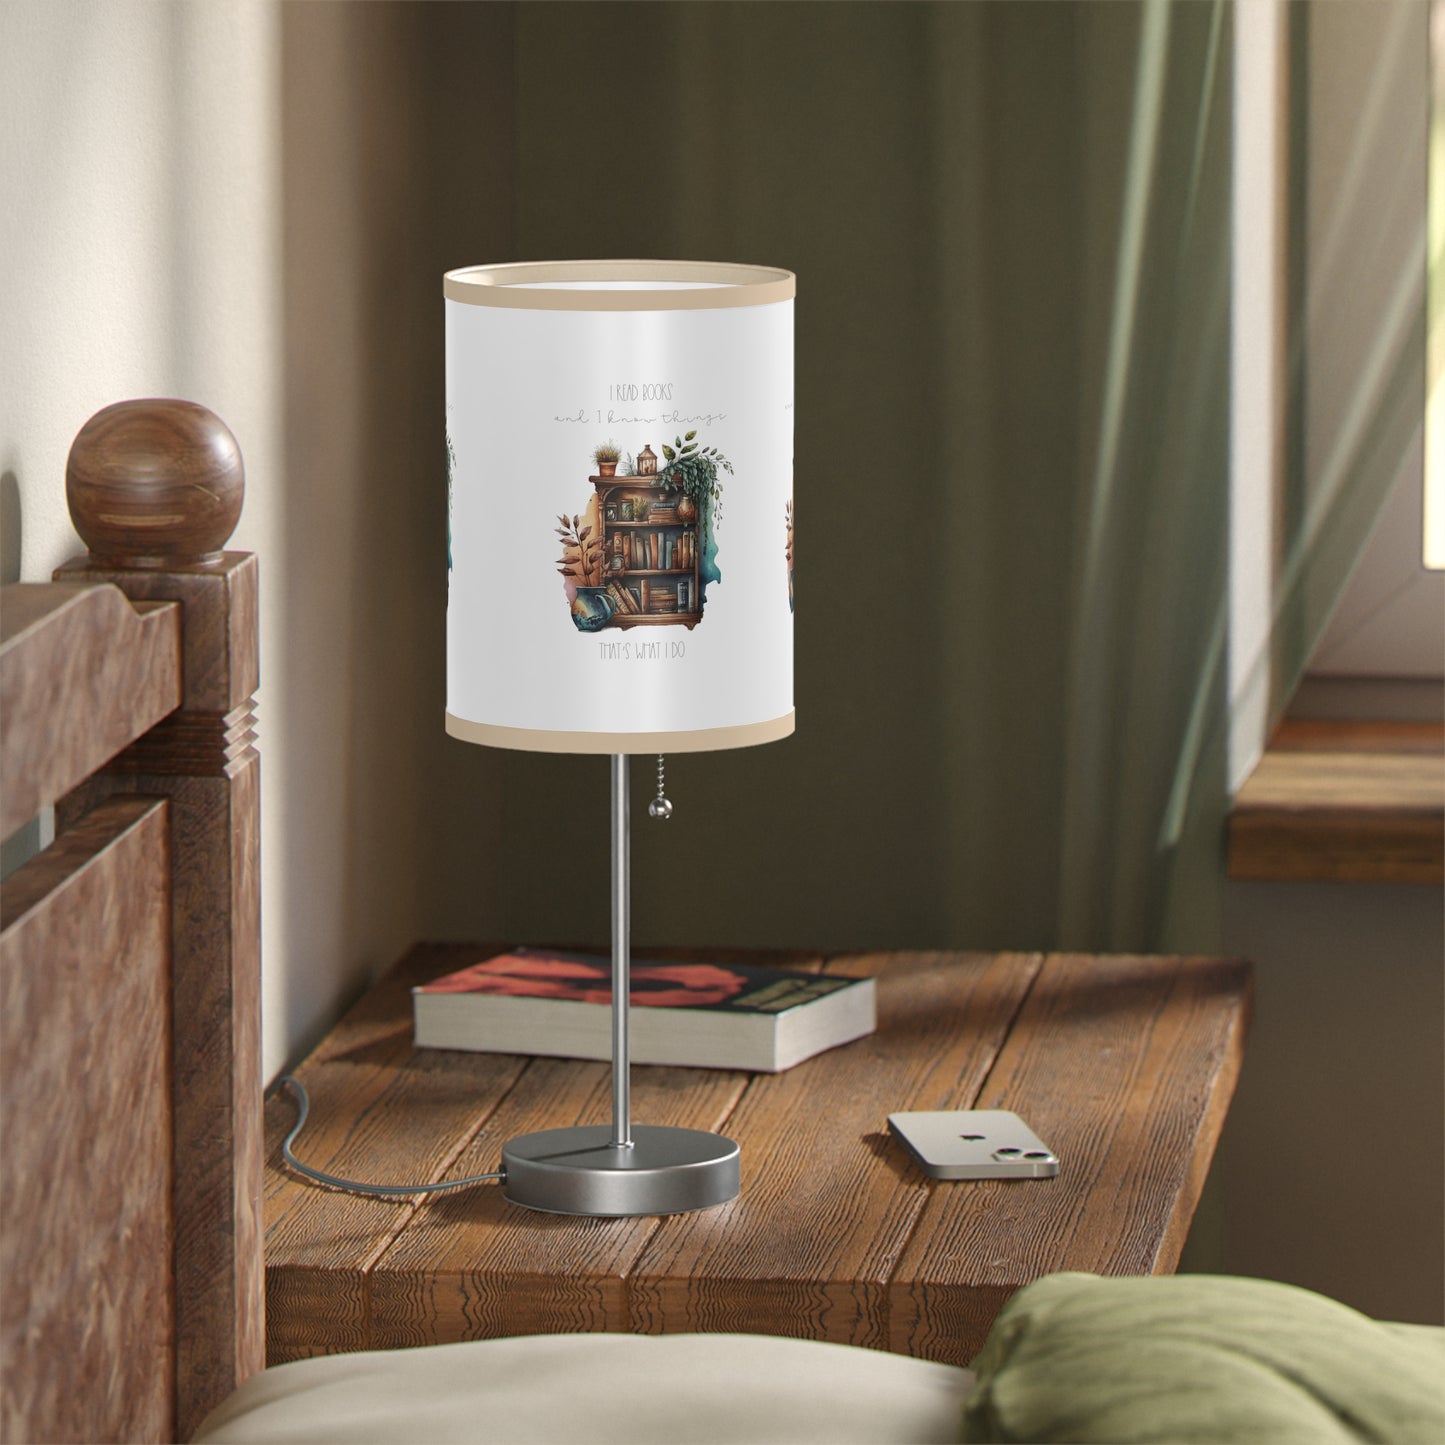 Lamp on a Stand, US|CA plug ”I read books and I know things. That’s what I do.”